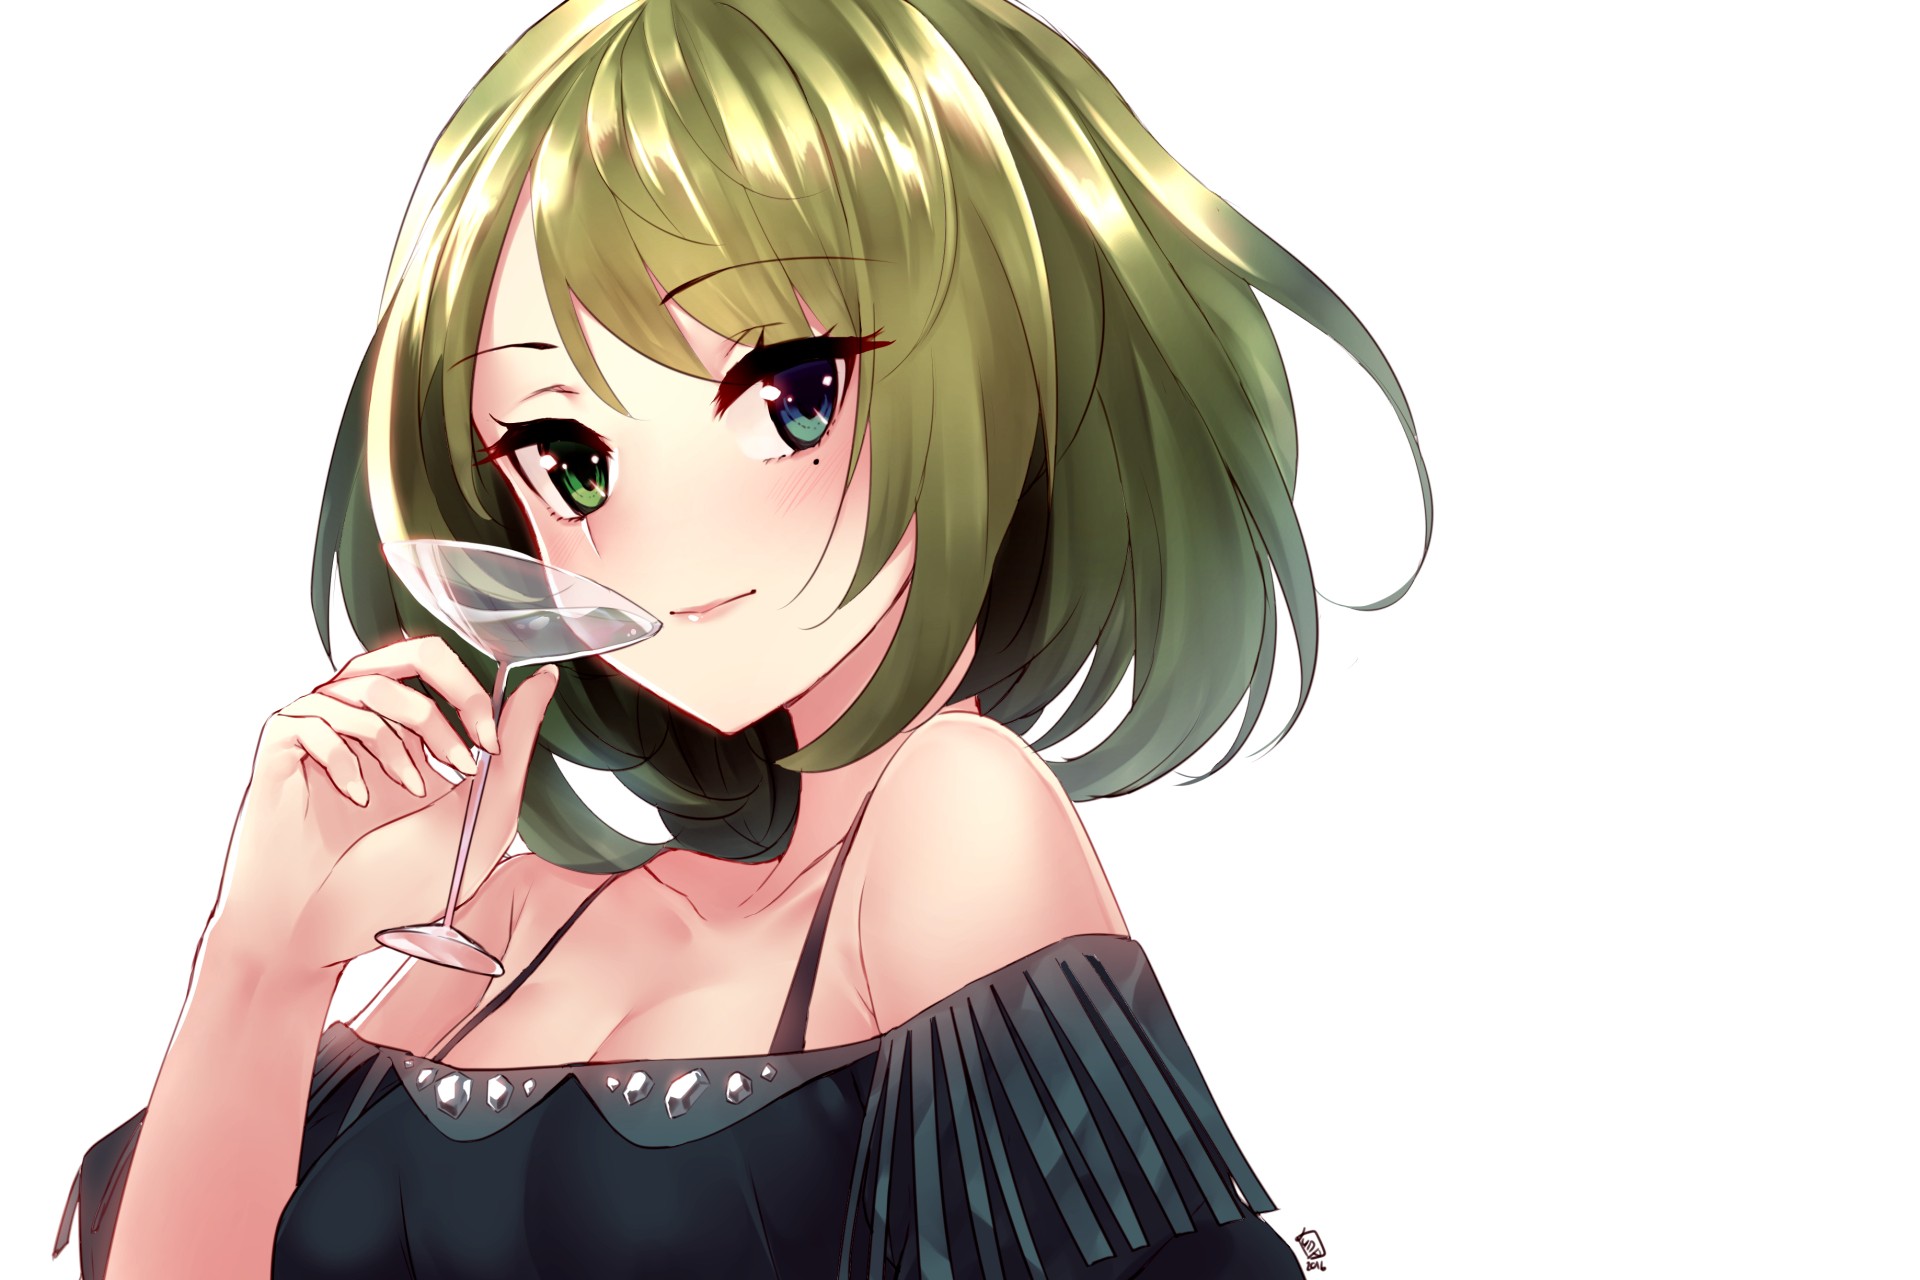 Anime 1920x1280 anime anime girls THE iDOLM@STER THE iDOLM@STER: Cinderella Girls Takagaki Kaede cleavage heterochromia short hair drinking glass Pixiv white background simple background looking at viewer shoulder length hair face